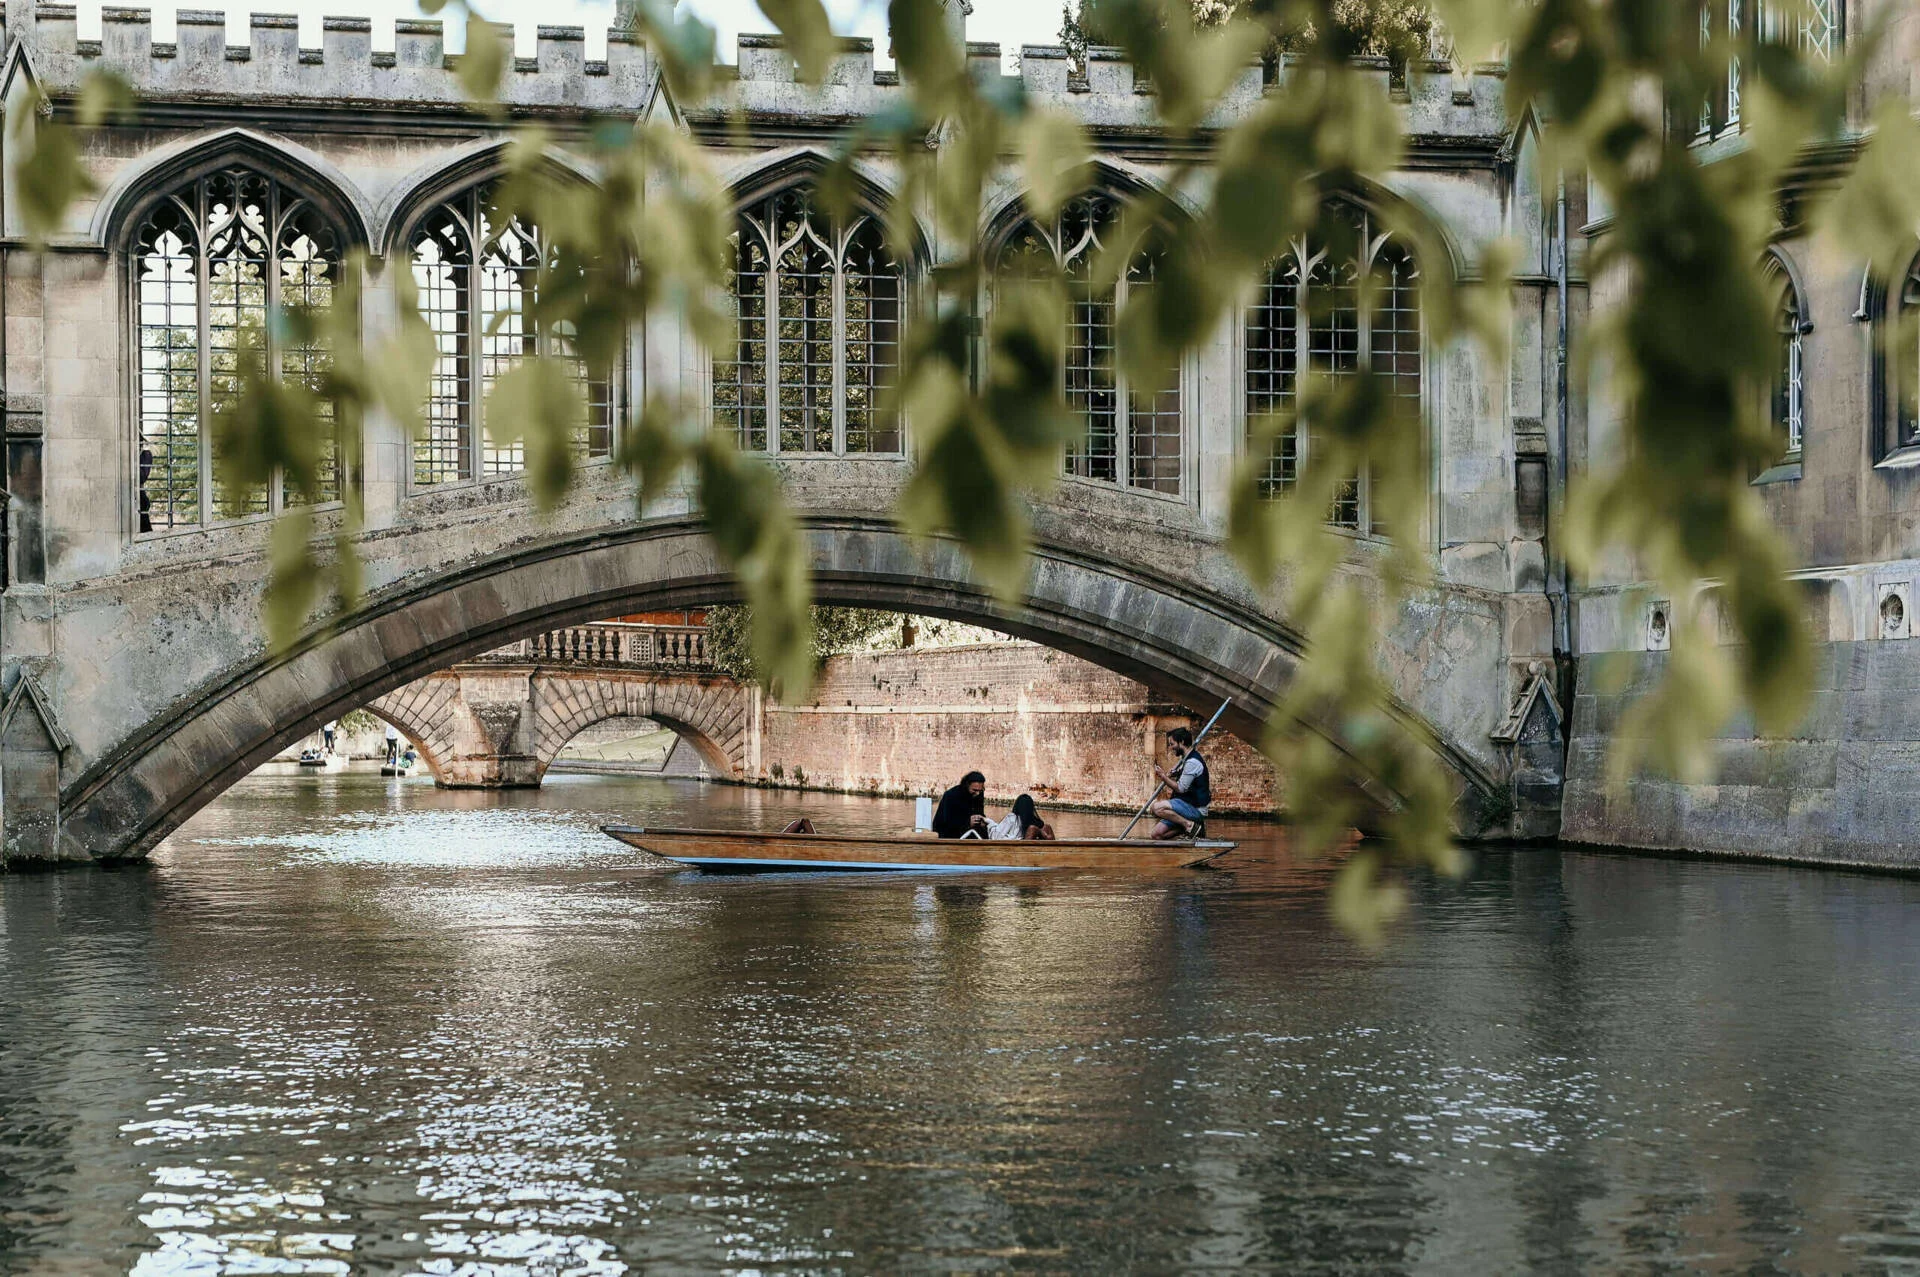 A couple sitting in a punt on a river, with a man holding a pole to push them along, they are going underneath a stone arch of an enclosed bridge.